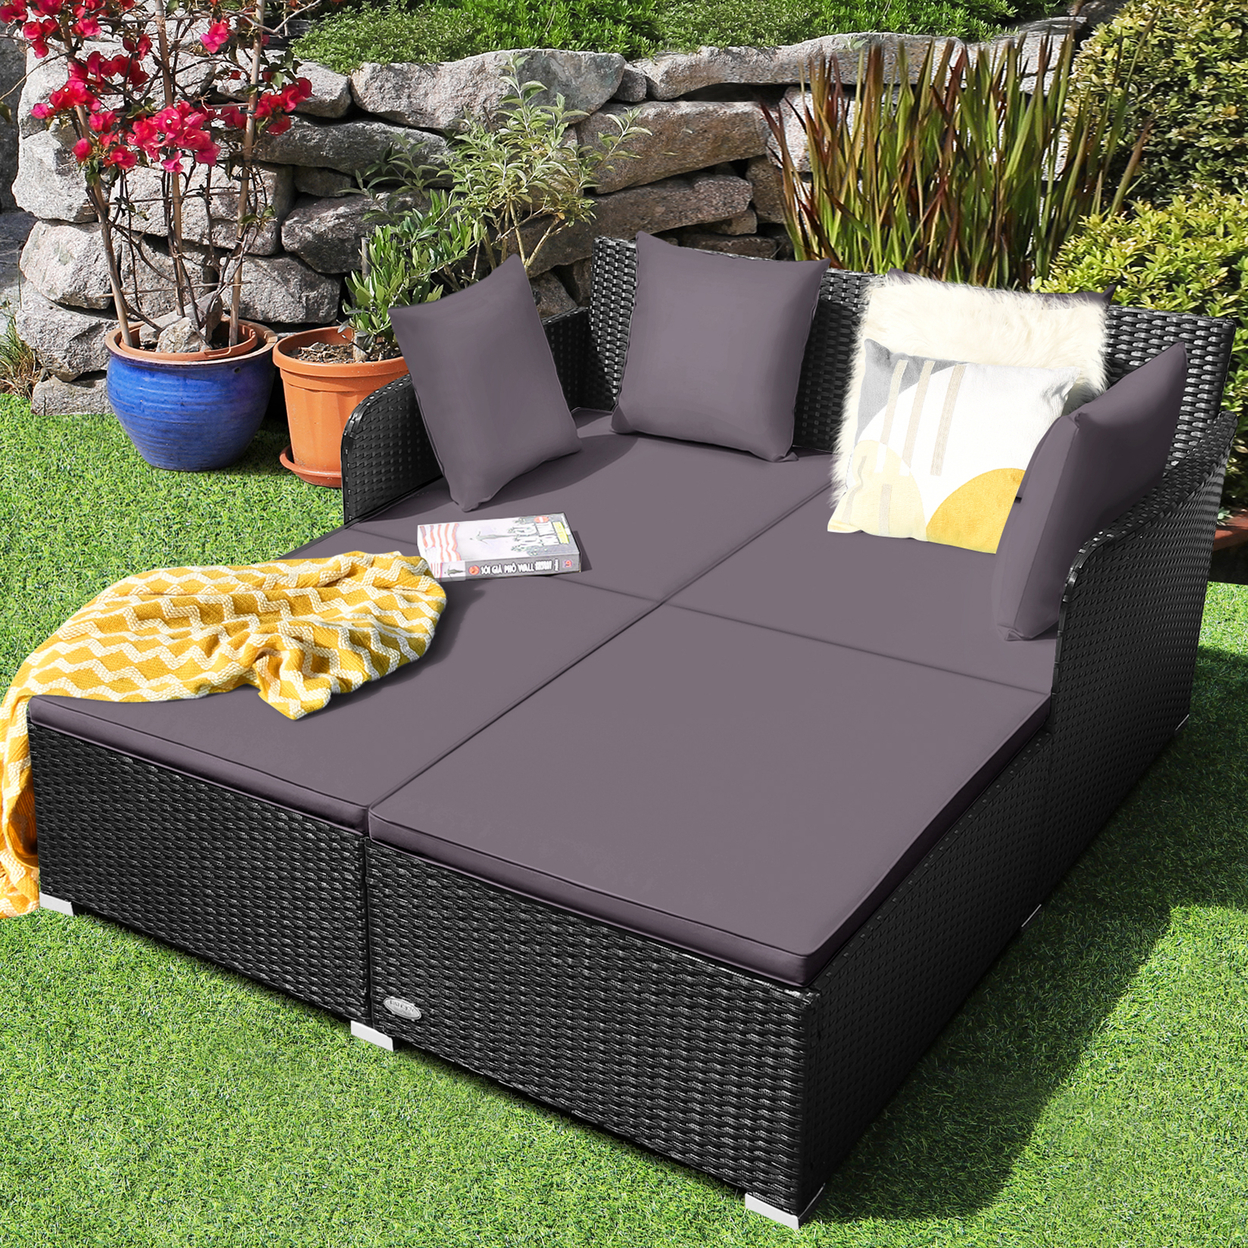 Rattan Patio Daybed Loveseat Sofa Yard Outdoor W/ Grey Cushions Pillows